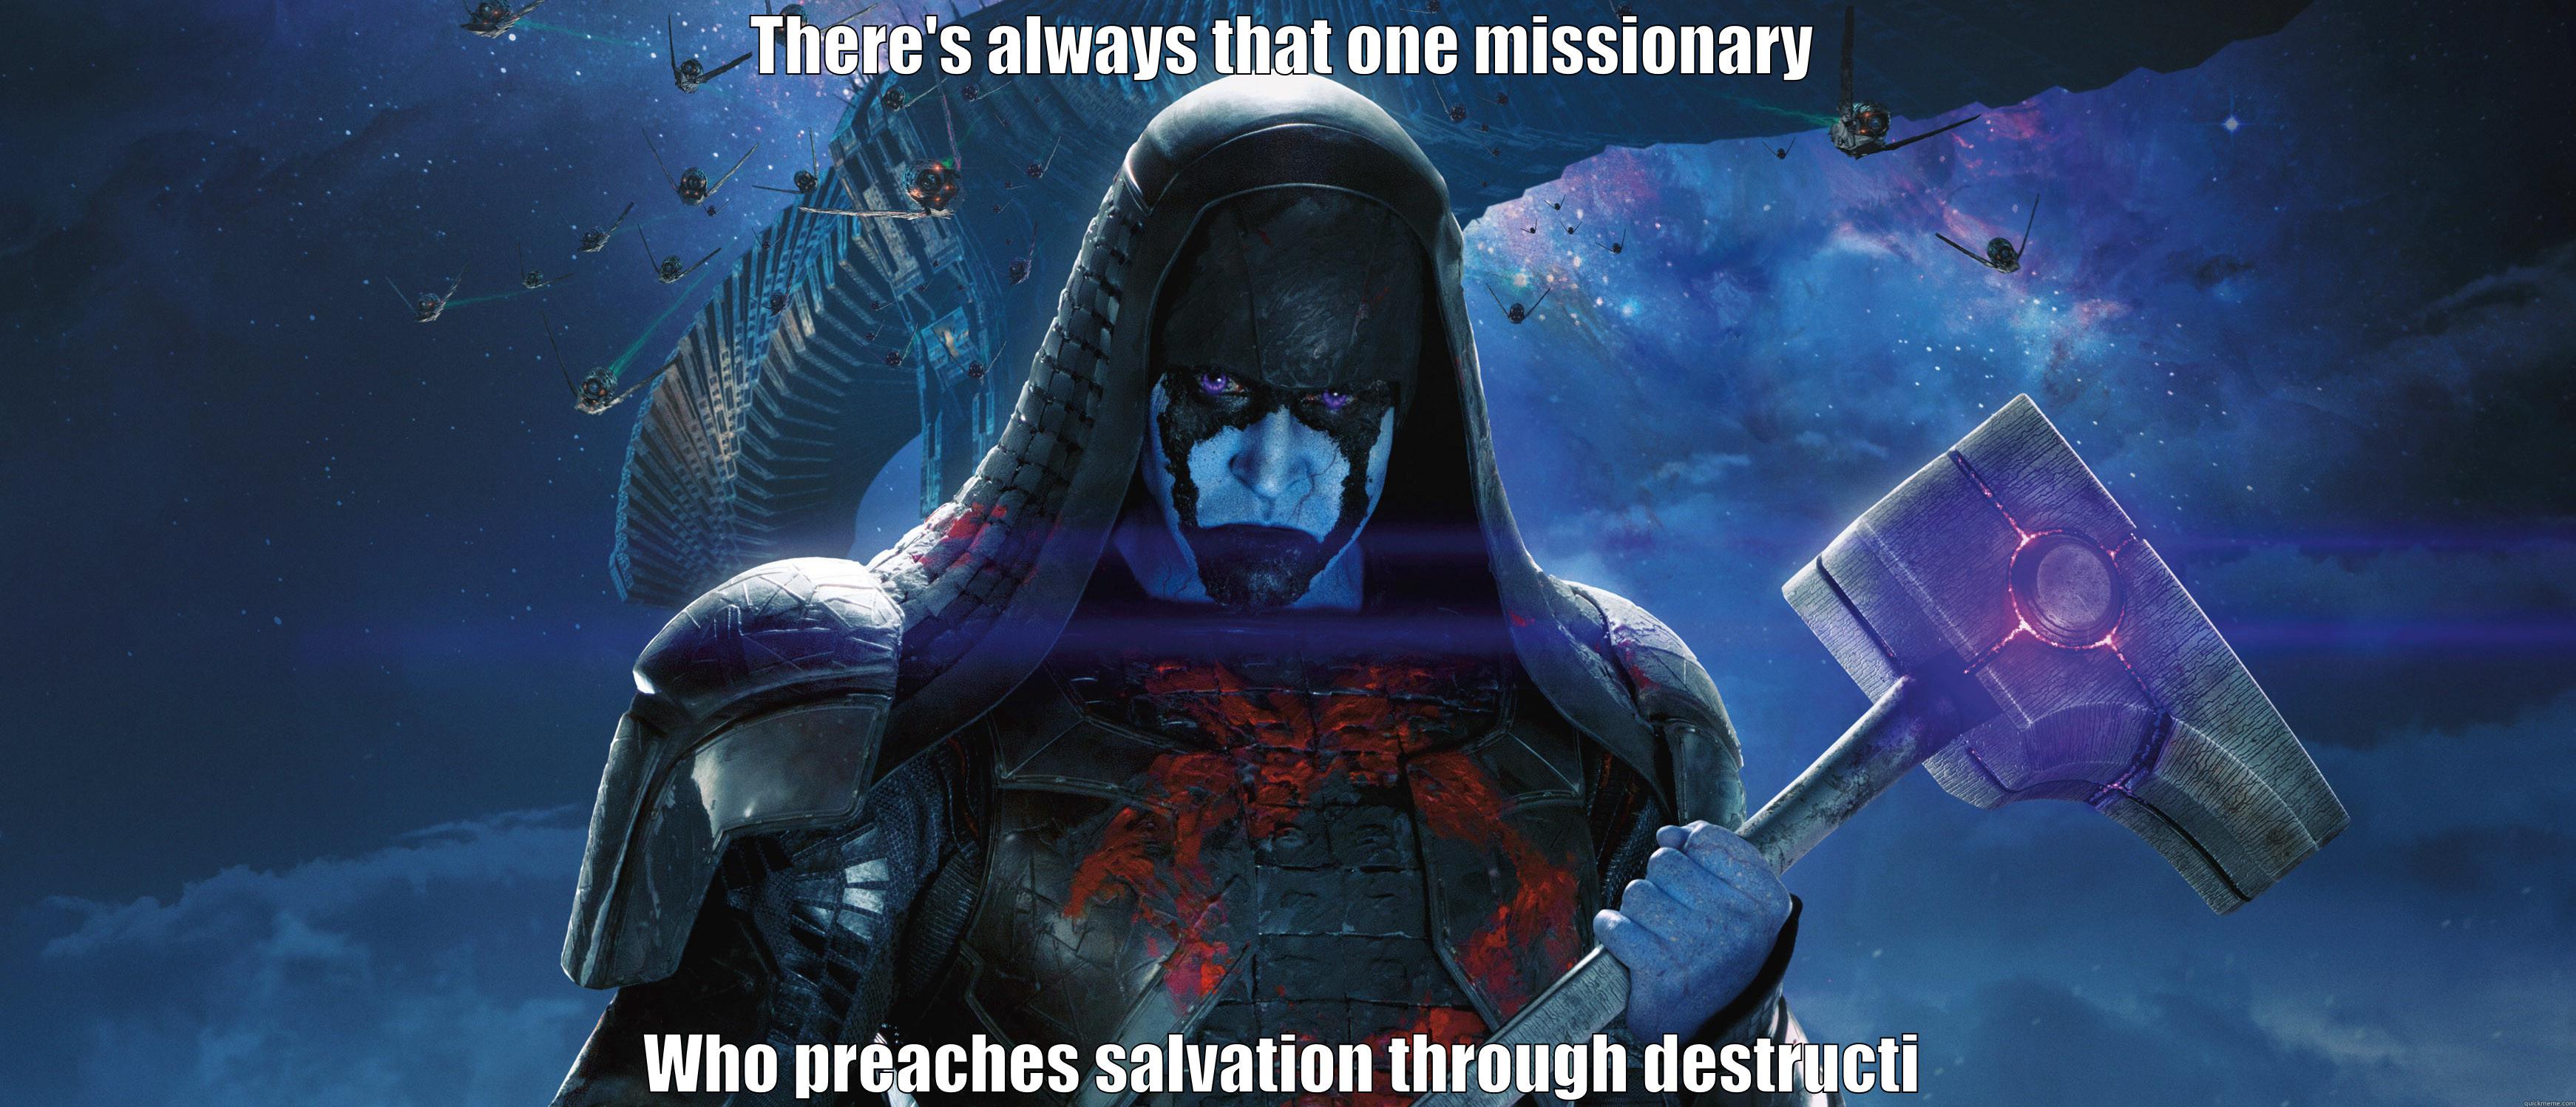 Ronan the missionary - THERE'S ALWAYS THAT ONE MISSIONARY WHO PREACHES SALVATION THROUGH DESTRUCTION Misc